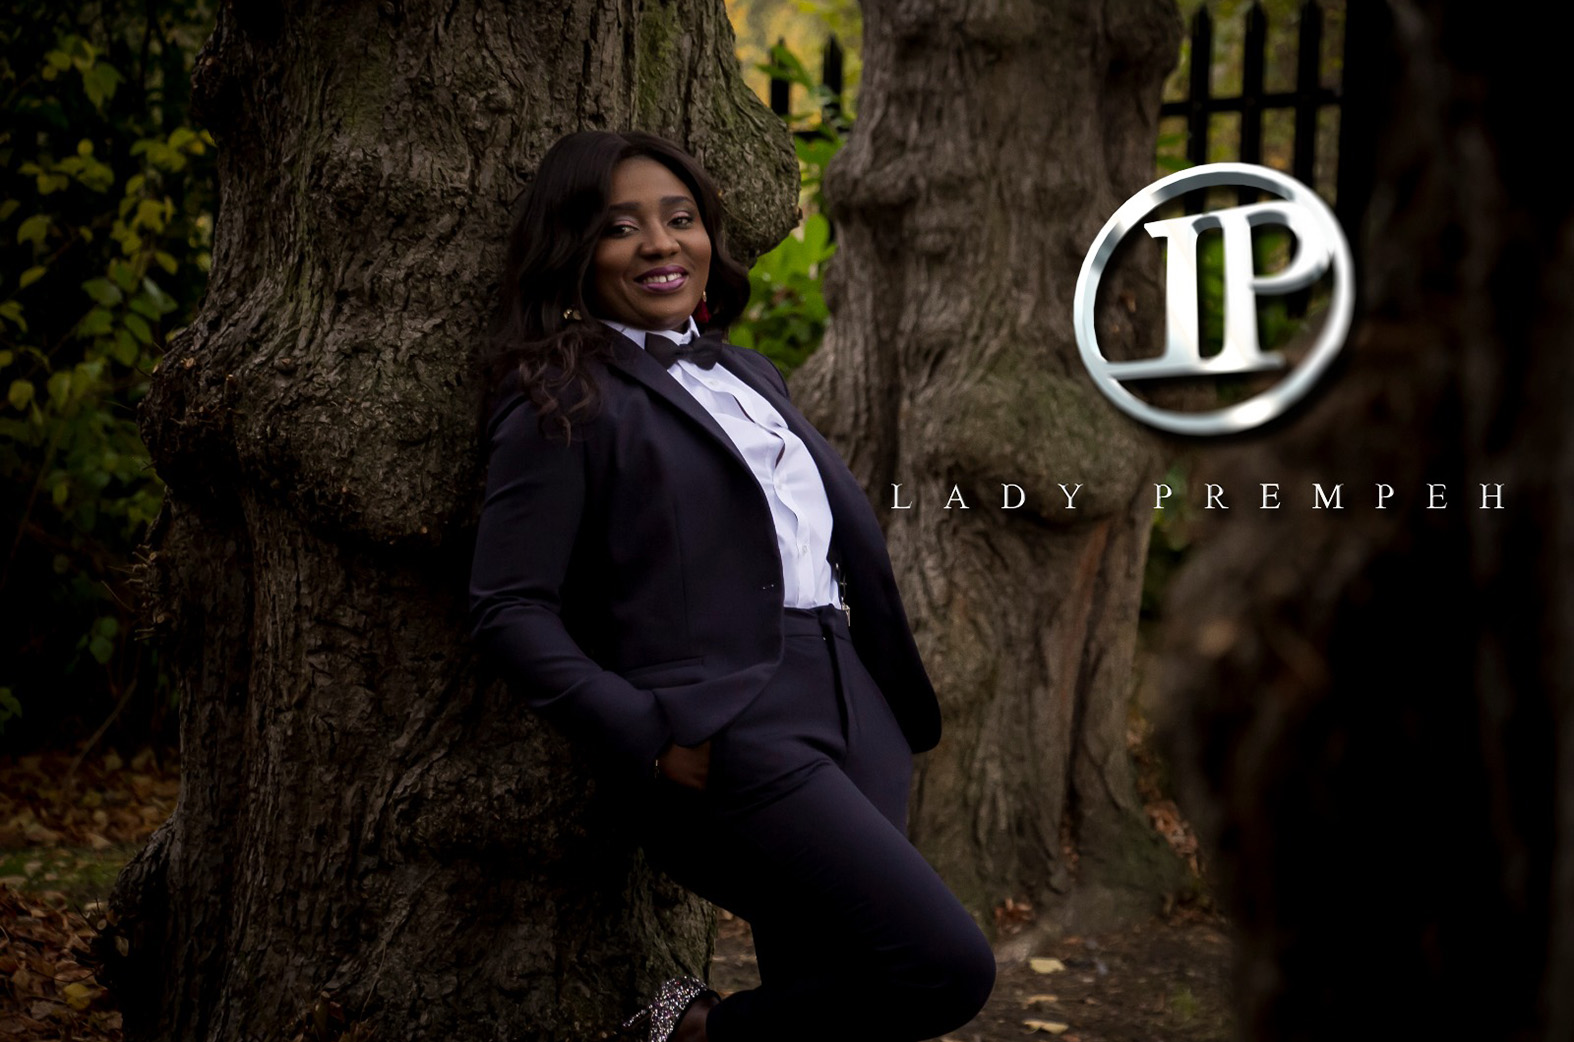 Lady Prempeh makes a major come back